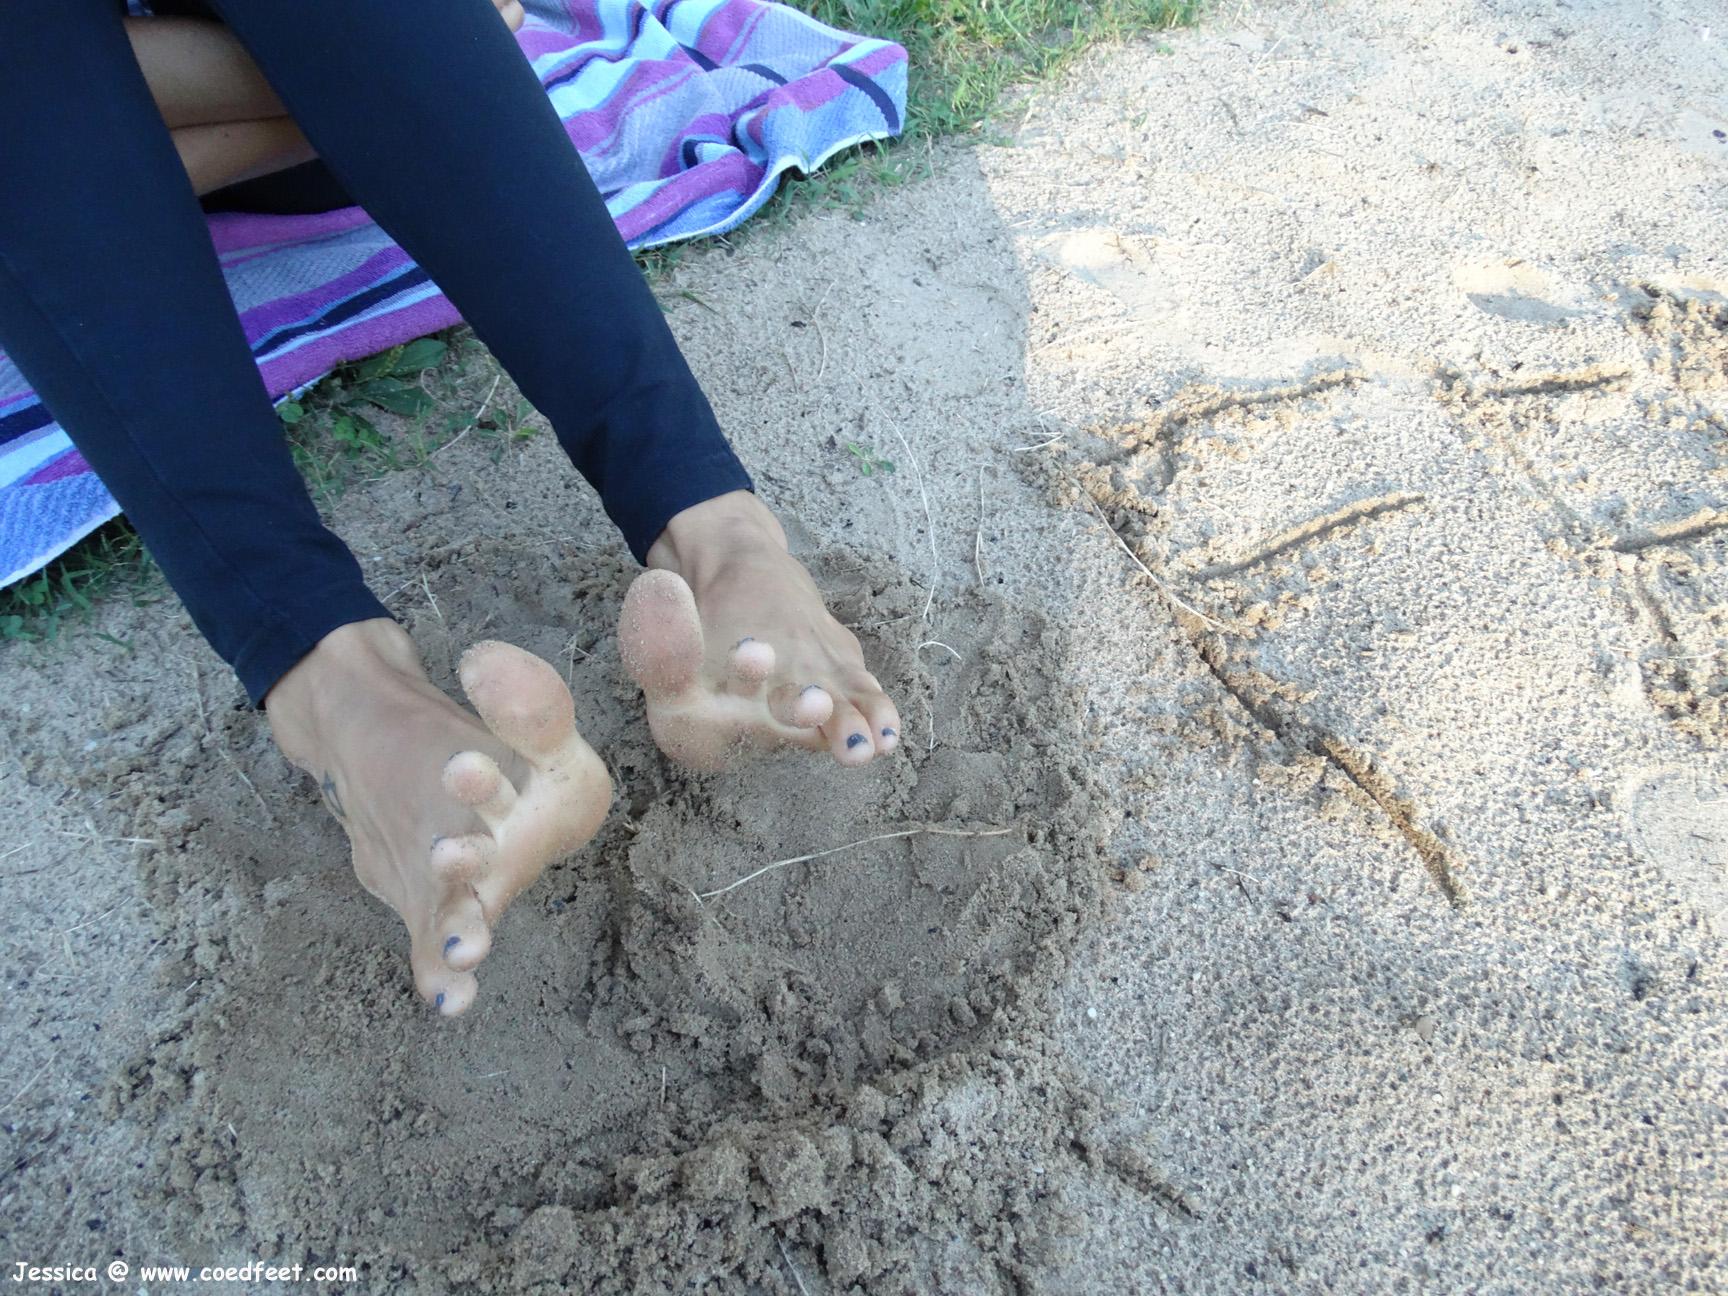 Coed Feet On Twitter Jessica Spreads Her Toes To Get The Sand Out